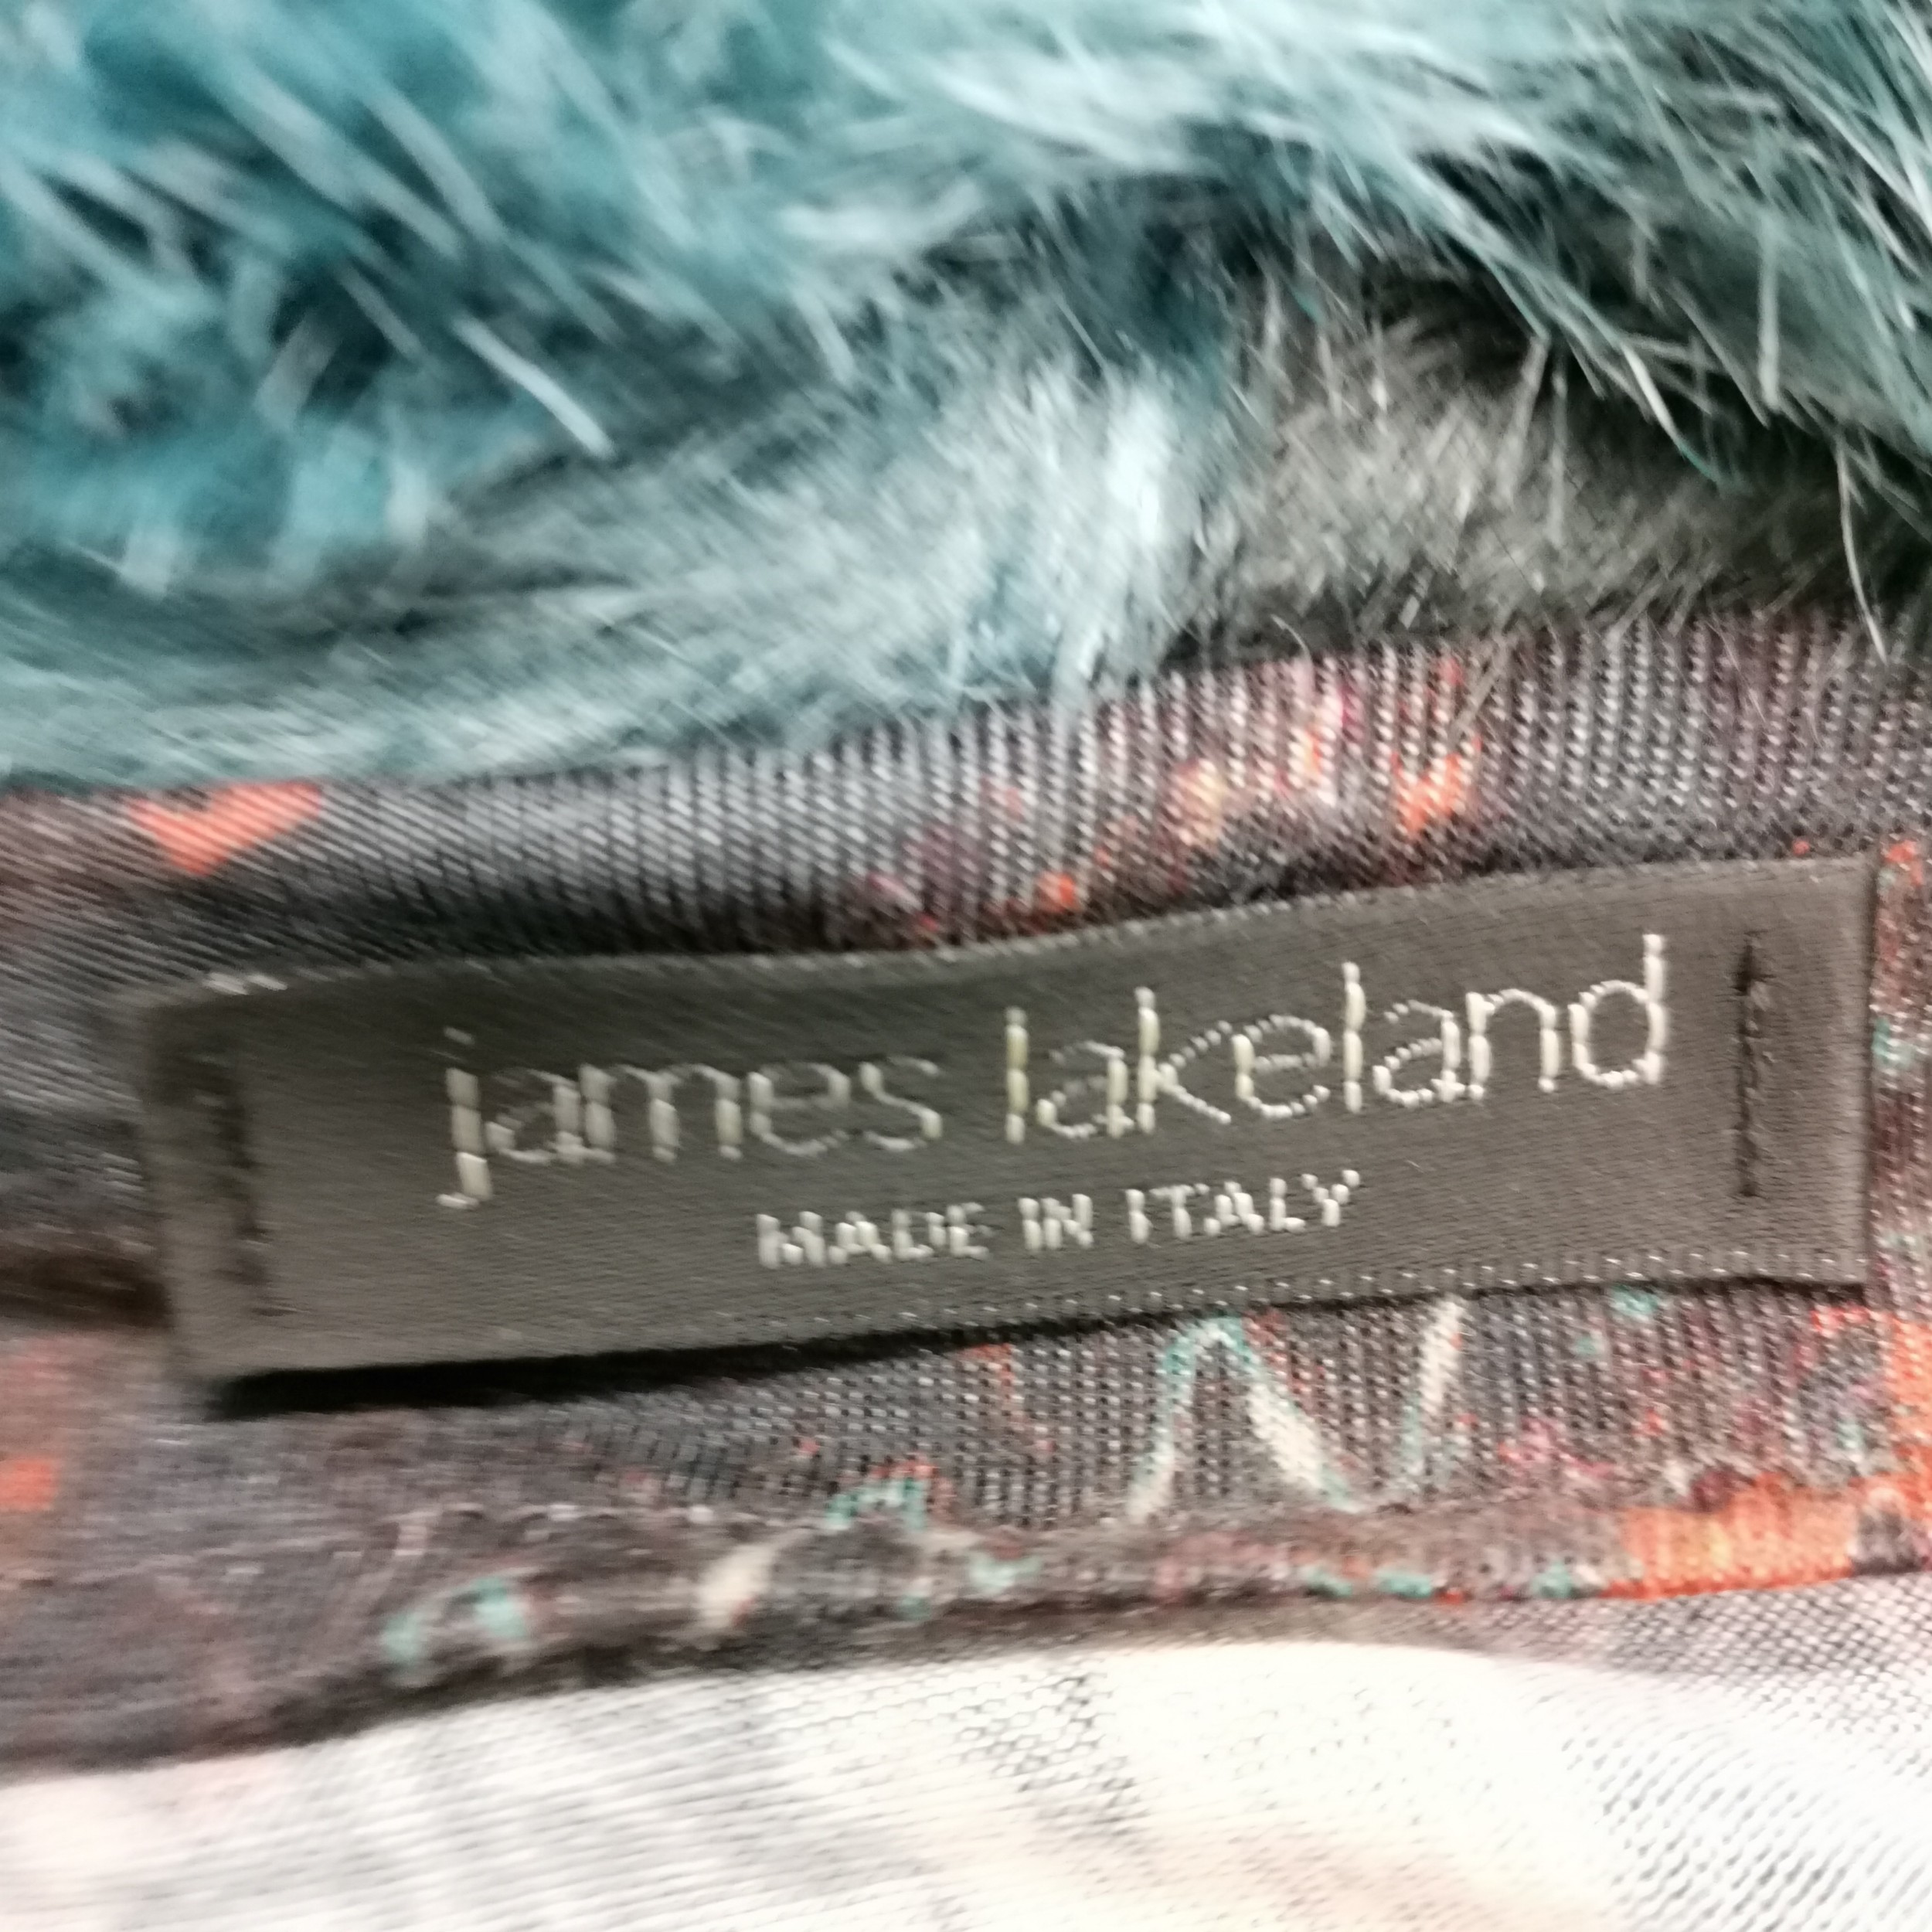 Vintage patterned unlined jacket with teal faux fur trim by James Lakeland t/w navy wool and denim - Image 2 of 5